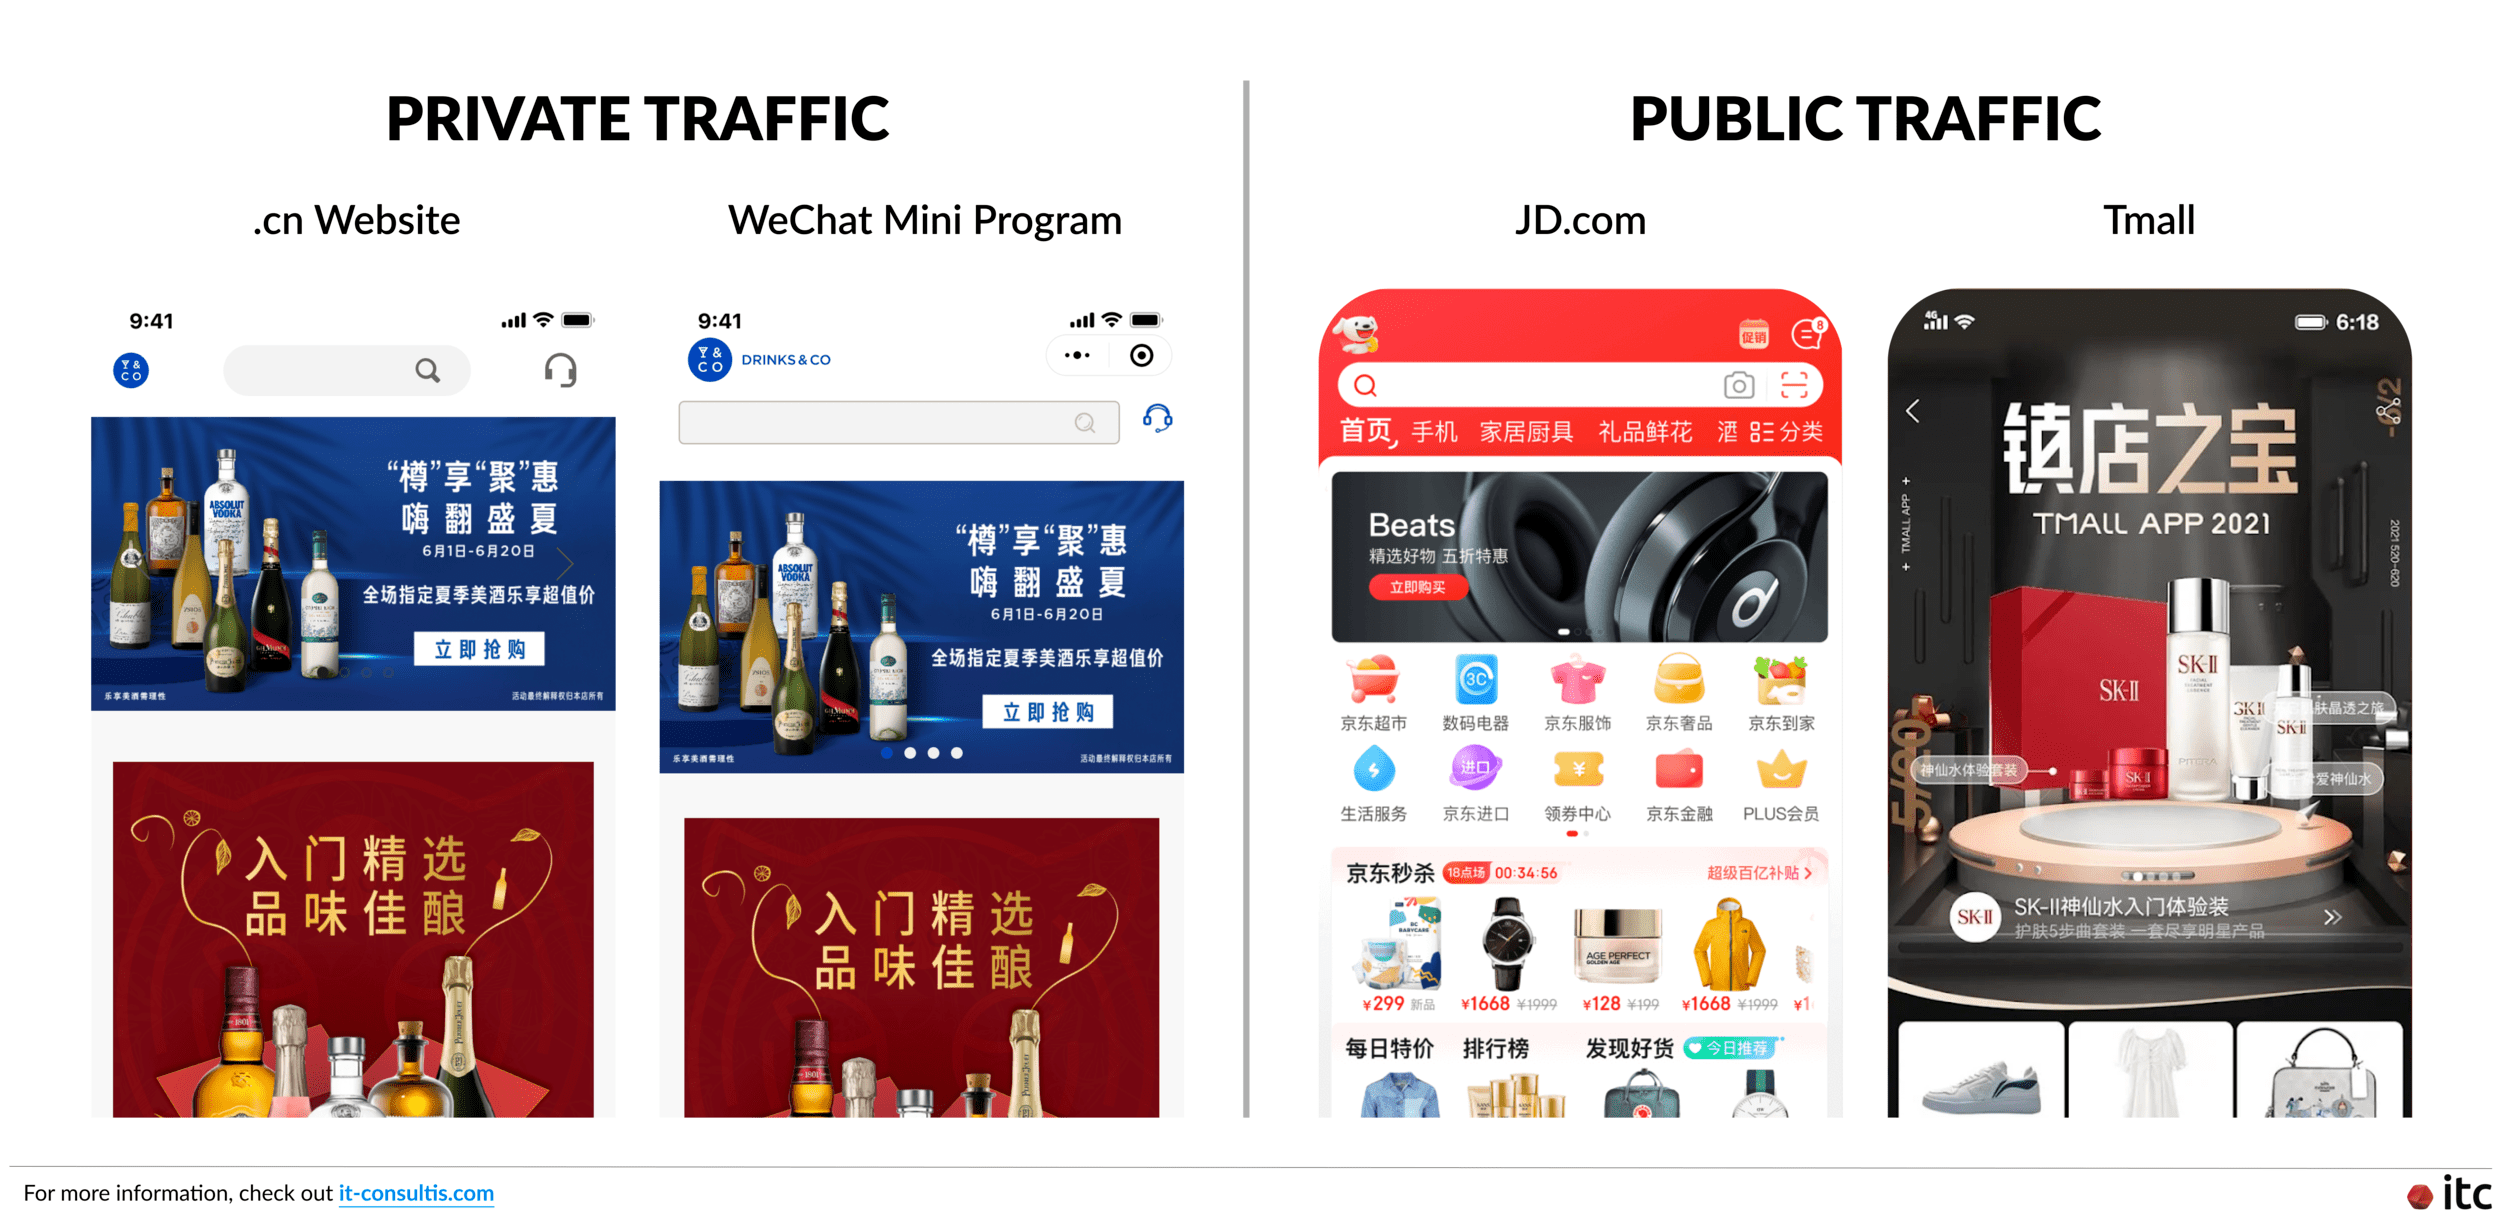 Public Traffic vs Private Traffic in China: public traffic channels include marketplaces like JD.com and Tmall, while private traffic domains include brand-owned platforms like .cn website and WeChat Mini Program